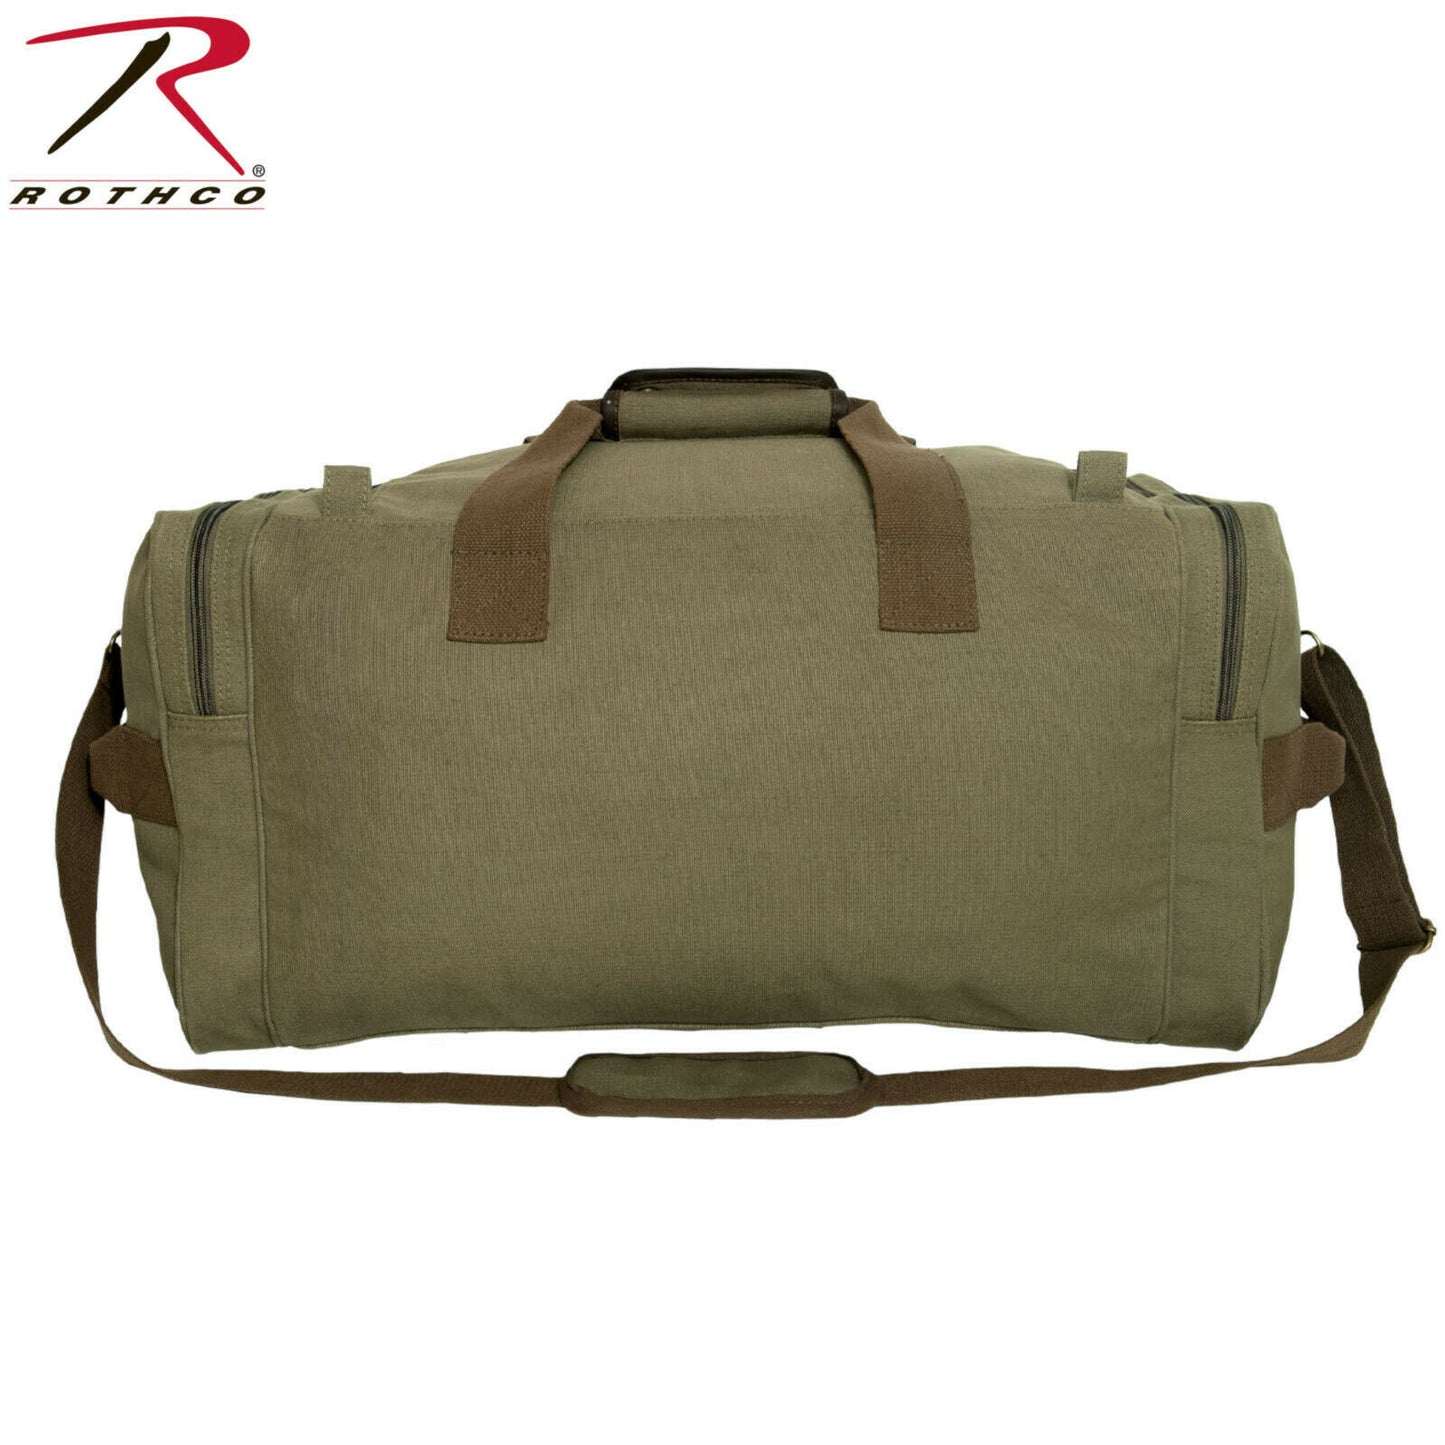 Rothco Long Journey, Extra Large Canvas Travel Bag - Olive Drab w/ Brown Accents